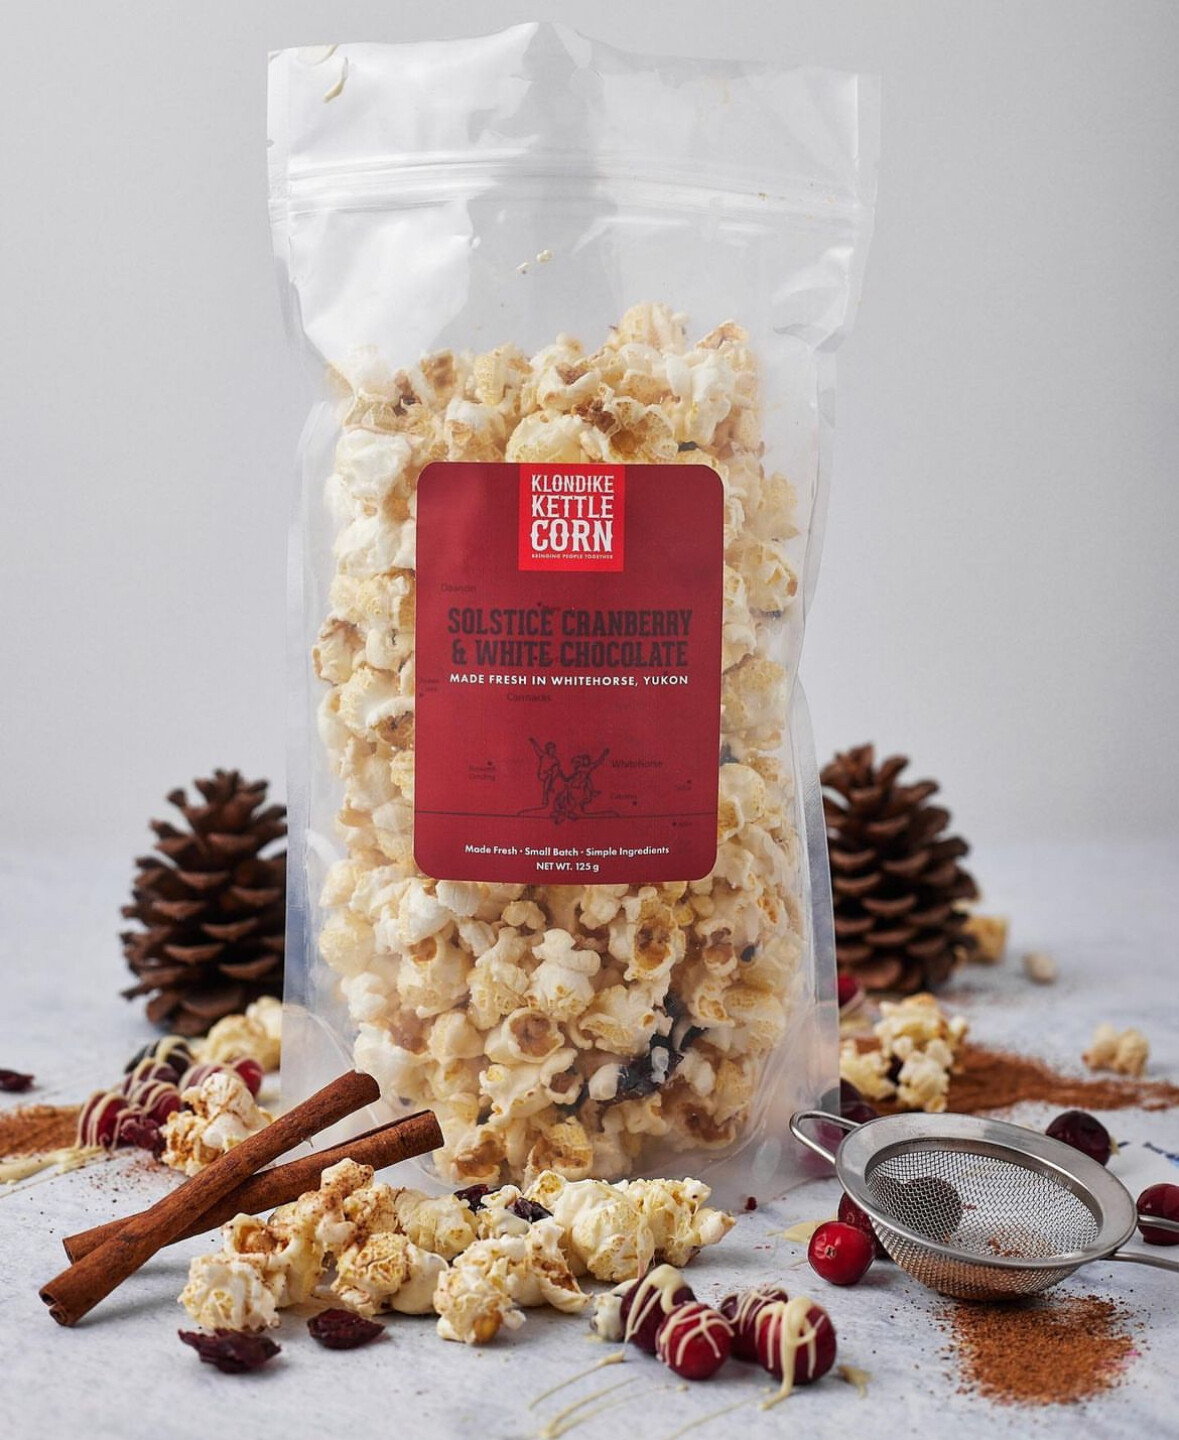 Solstice Cranberry & White Chocolate Kettle Corn